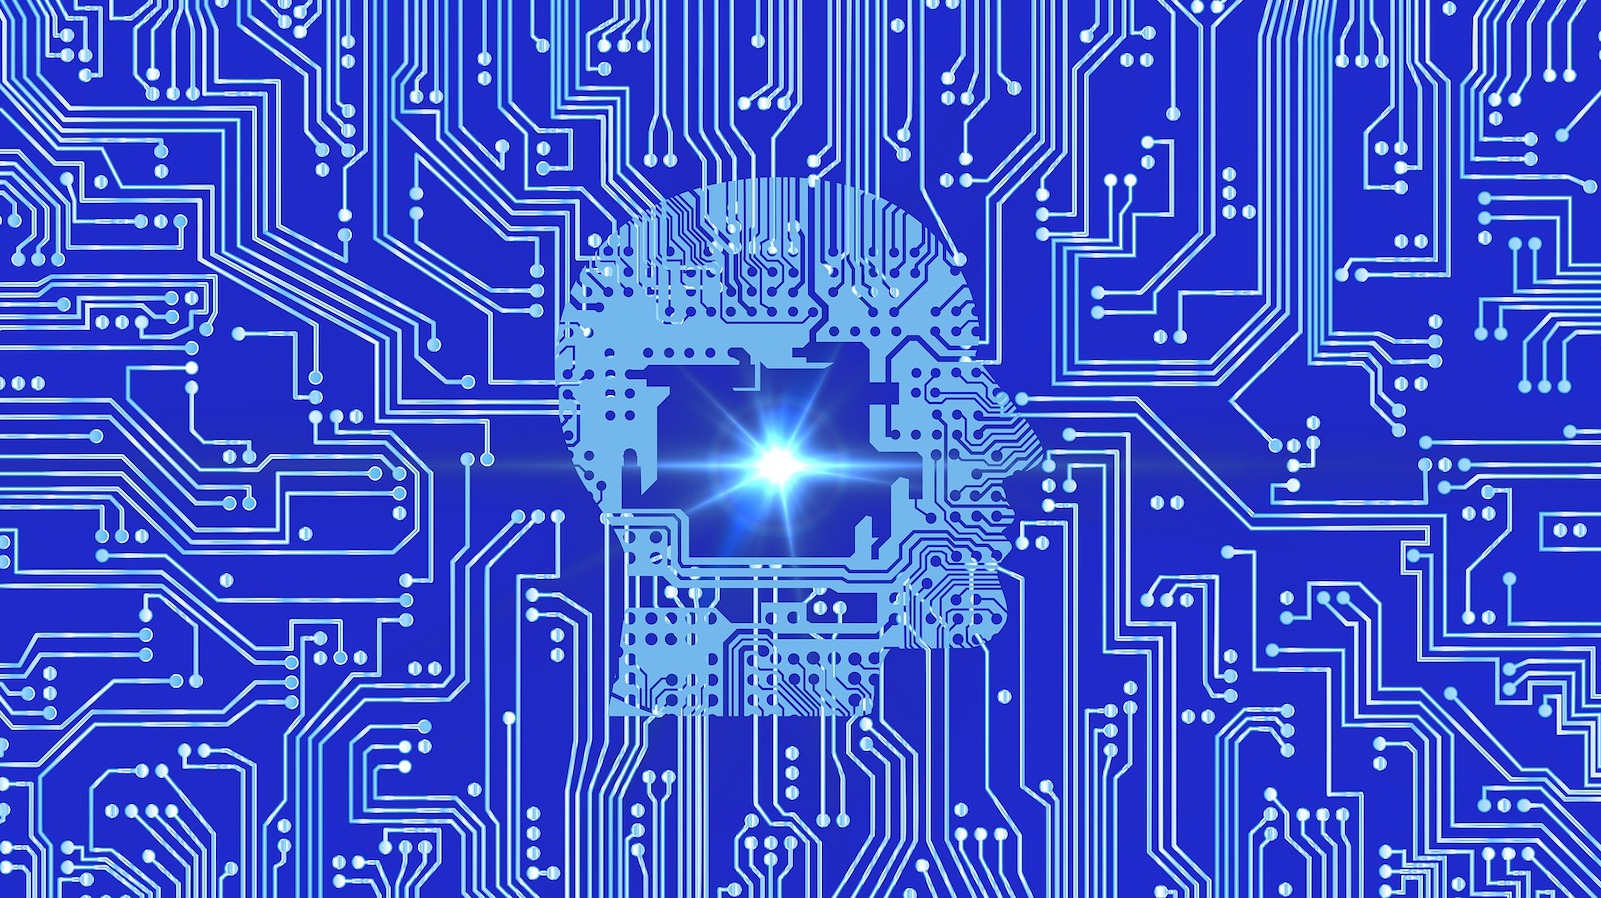 Blue circuit board with an artificial intelligence head overlaid on top